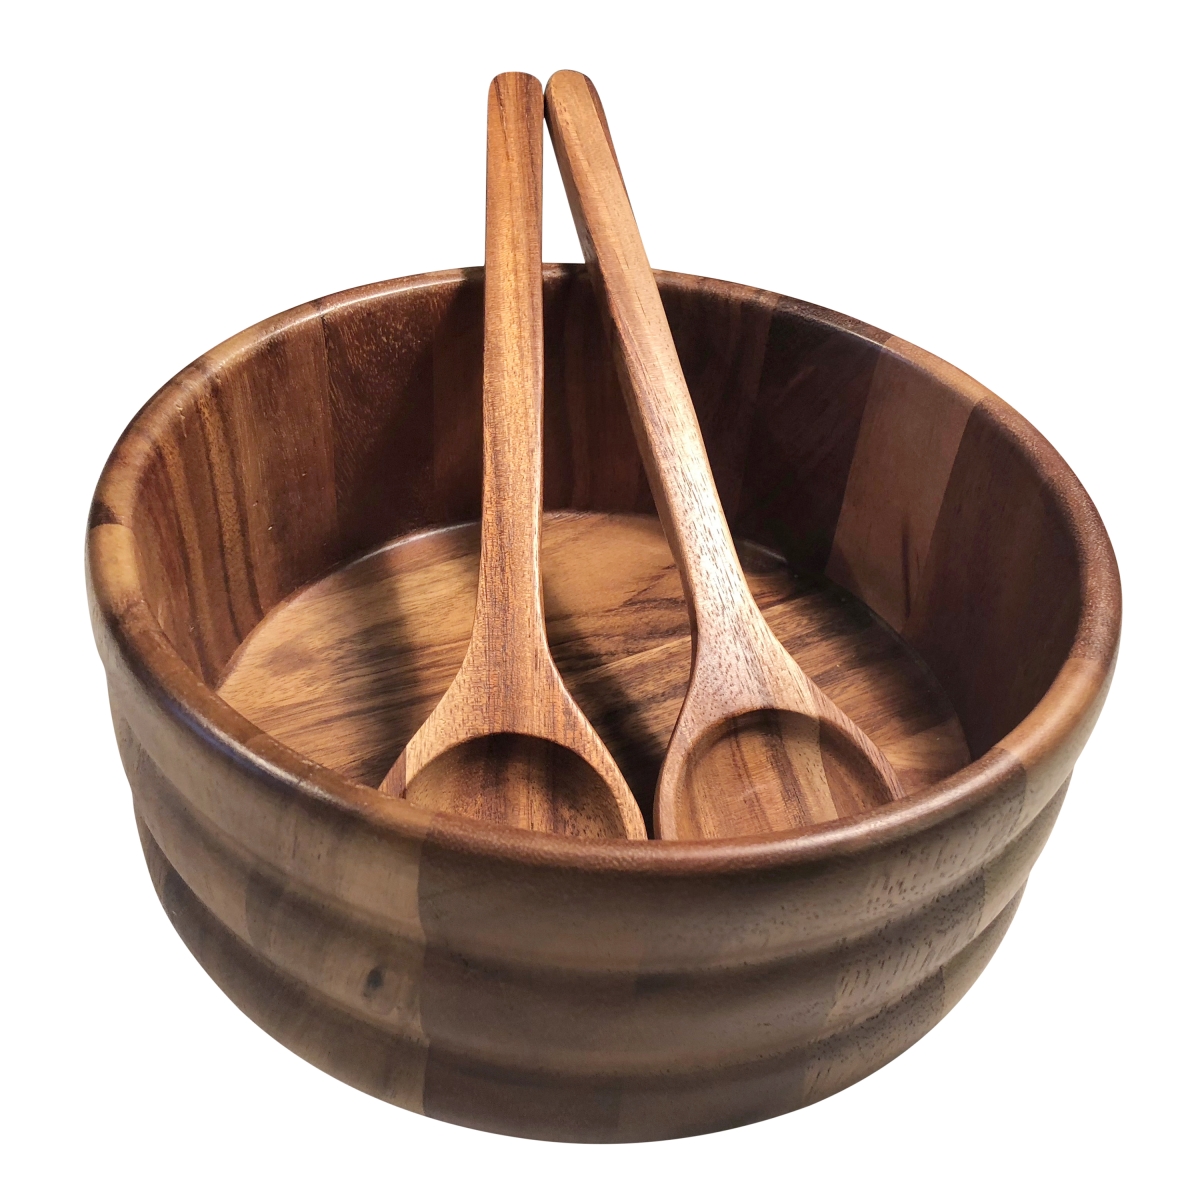 330b-3 4 In. Salad Bowl With Servers - 3 Piece